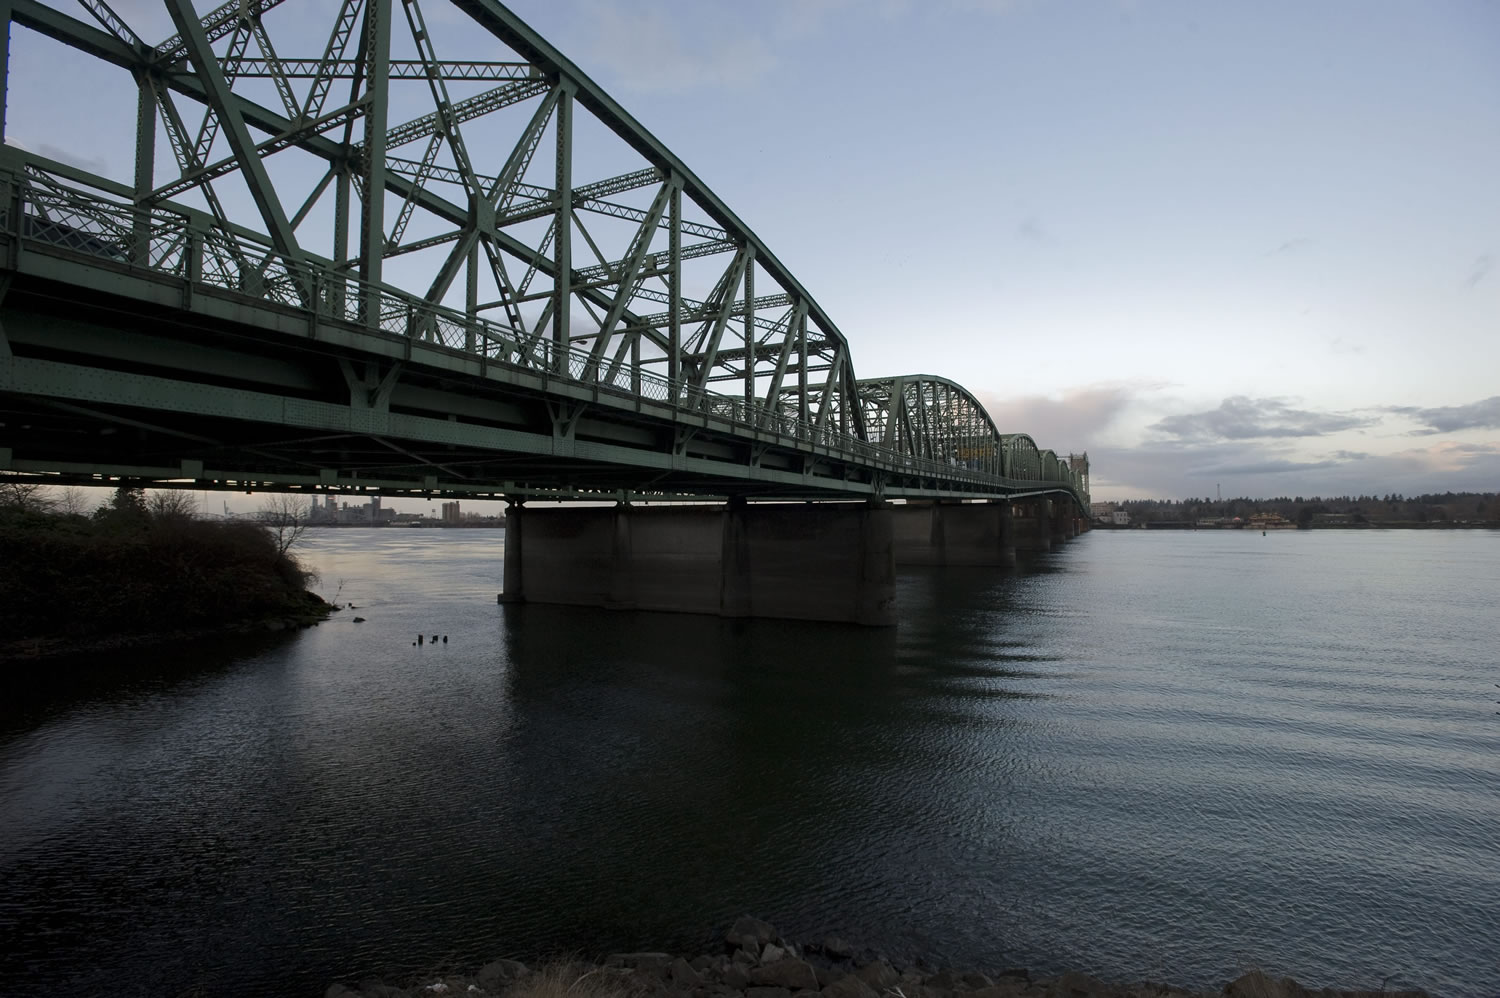 The Interstate 5 bridge from the Oregon side looking northwest toward Vancouver.